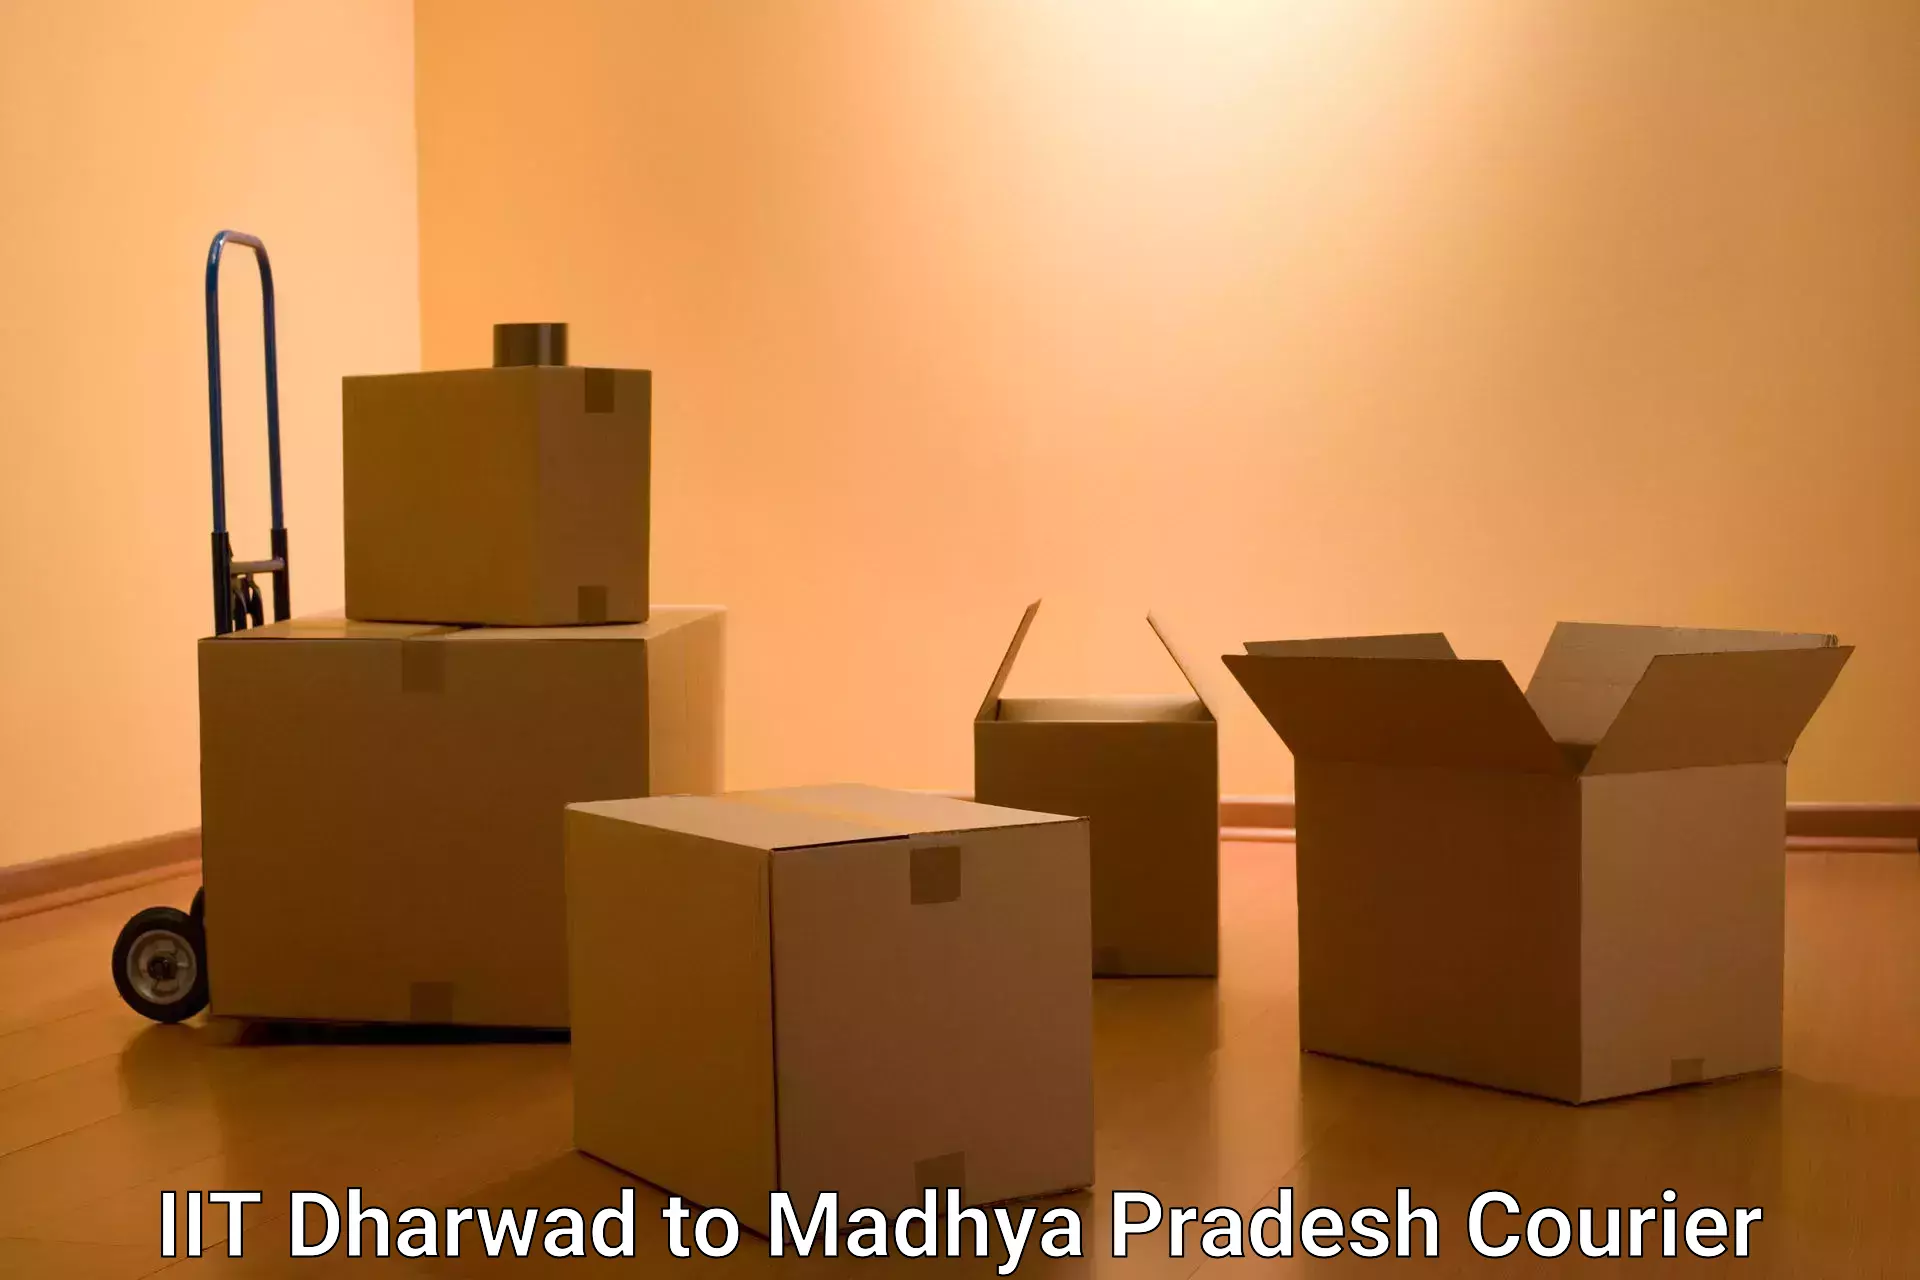 Personal courier services IIT Dharwad to Madhya Pradesh